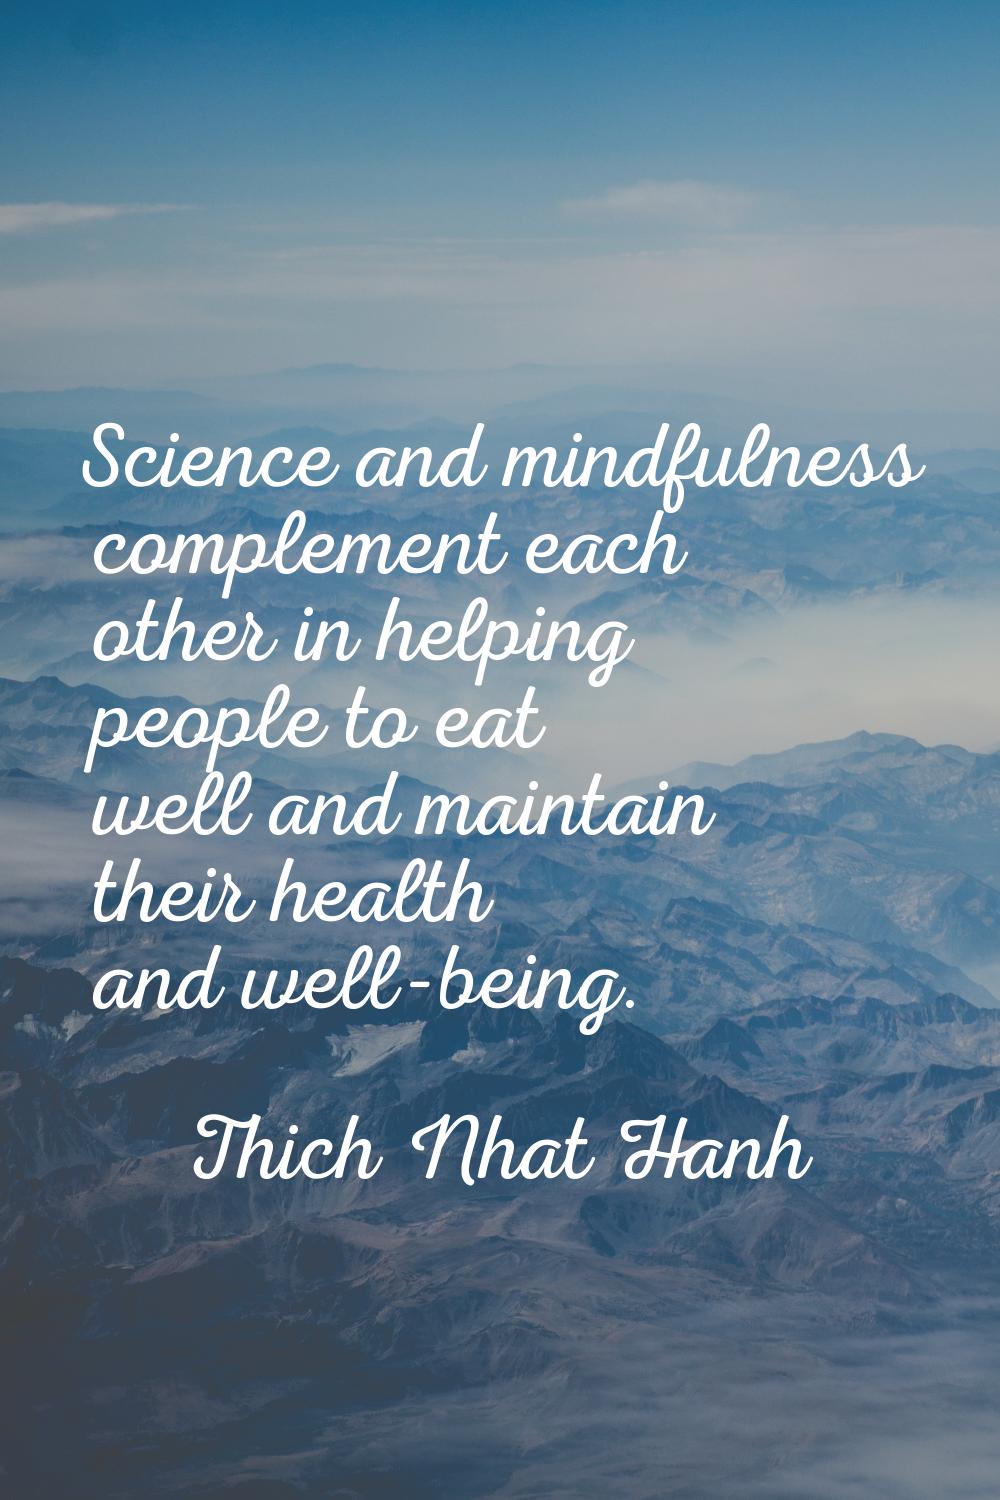 Science and mindfulness complement each other in helping people to eat well and maintain their heal